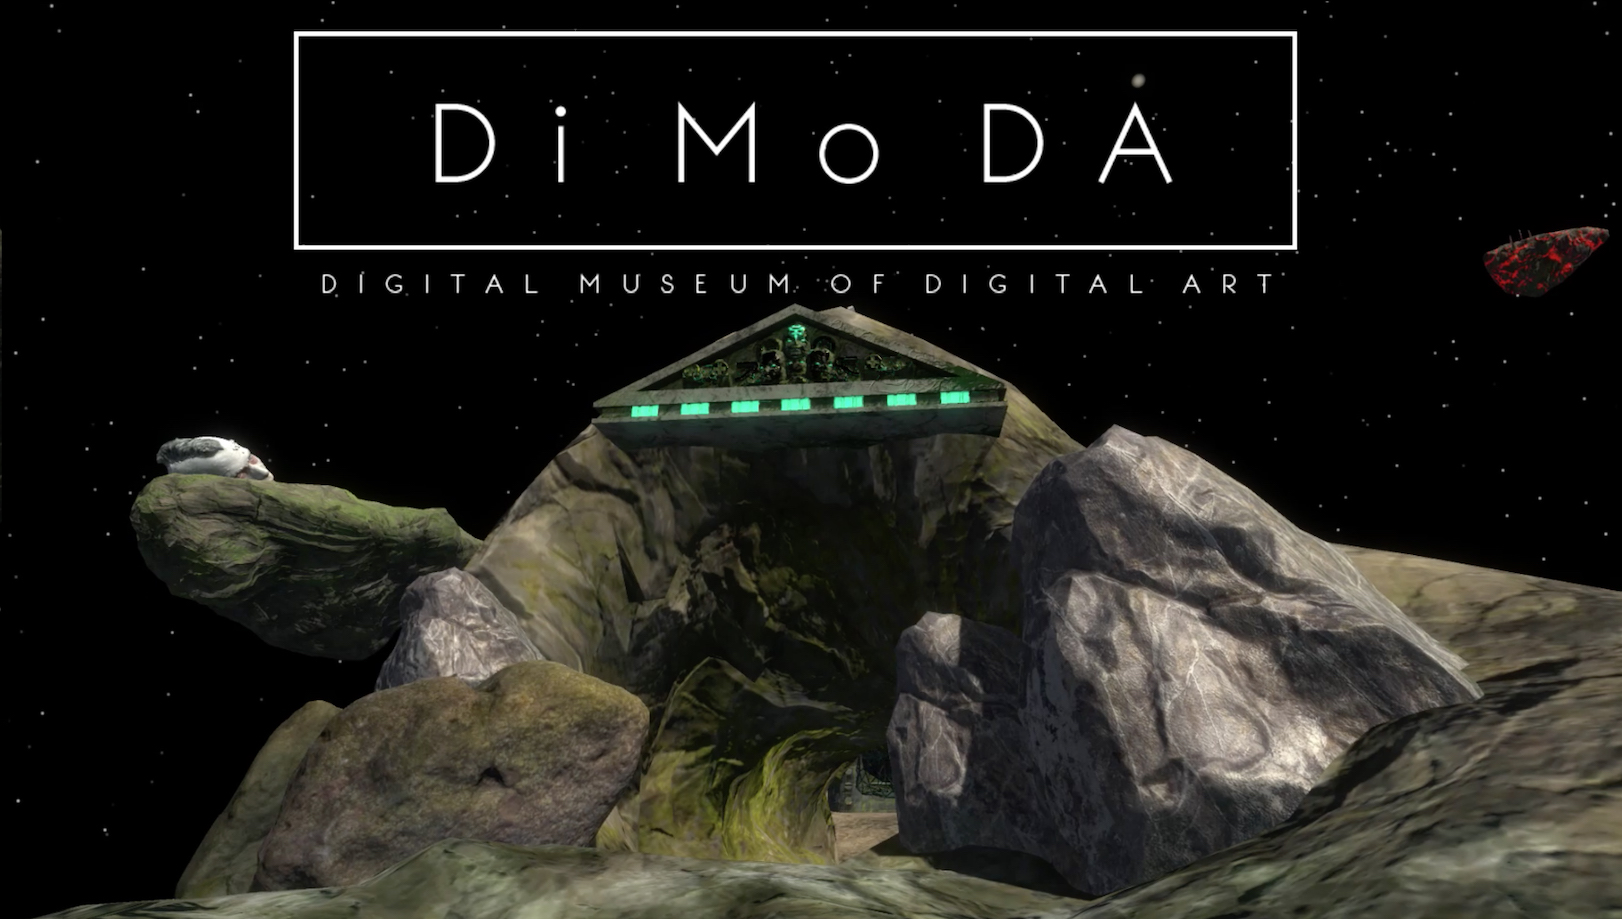 The Digital Museum of Digital Art by Alfredo Salazar-Caro and William Robertson, © the artists, courtesy of the artists and PRISKA PASQUER, Cologne 